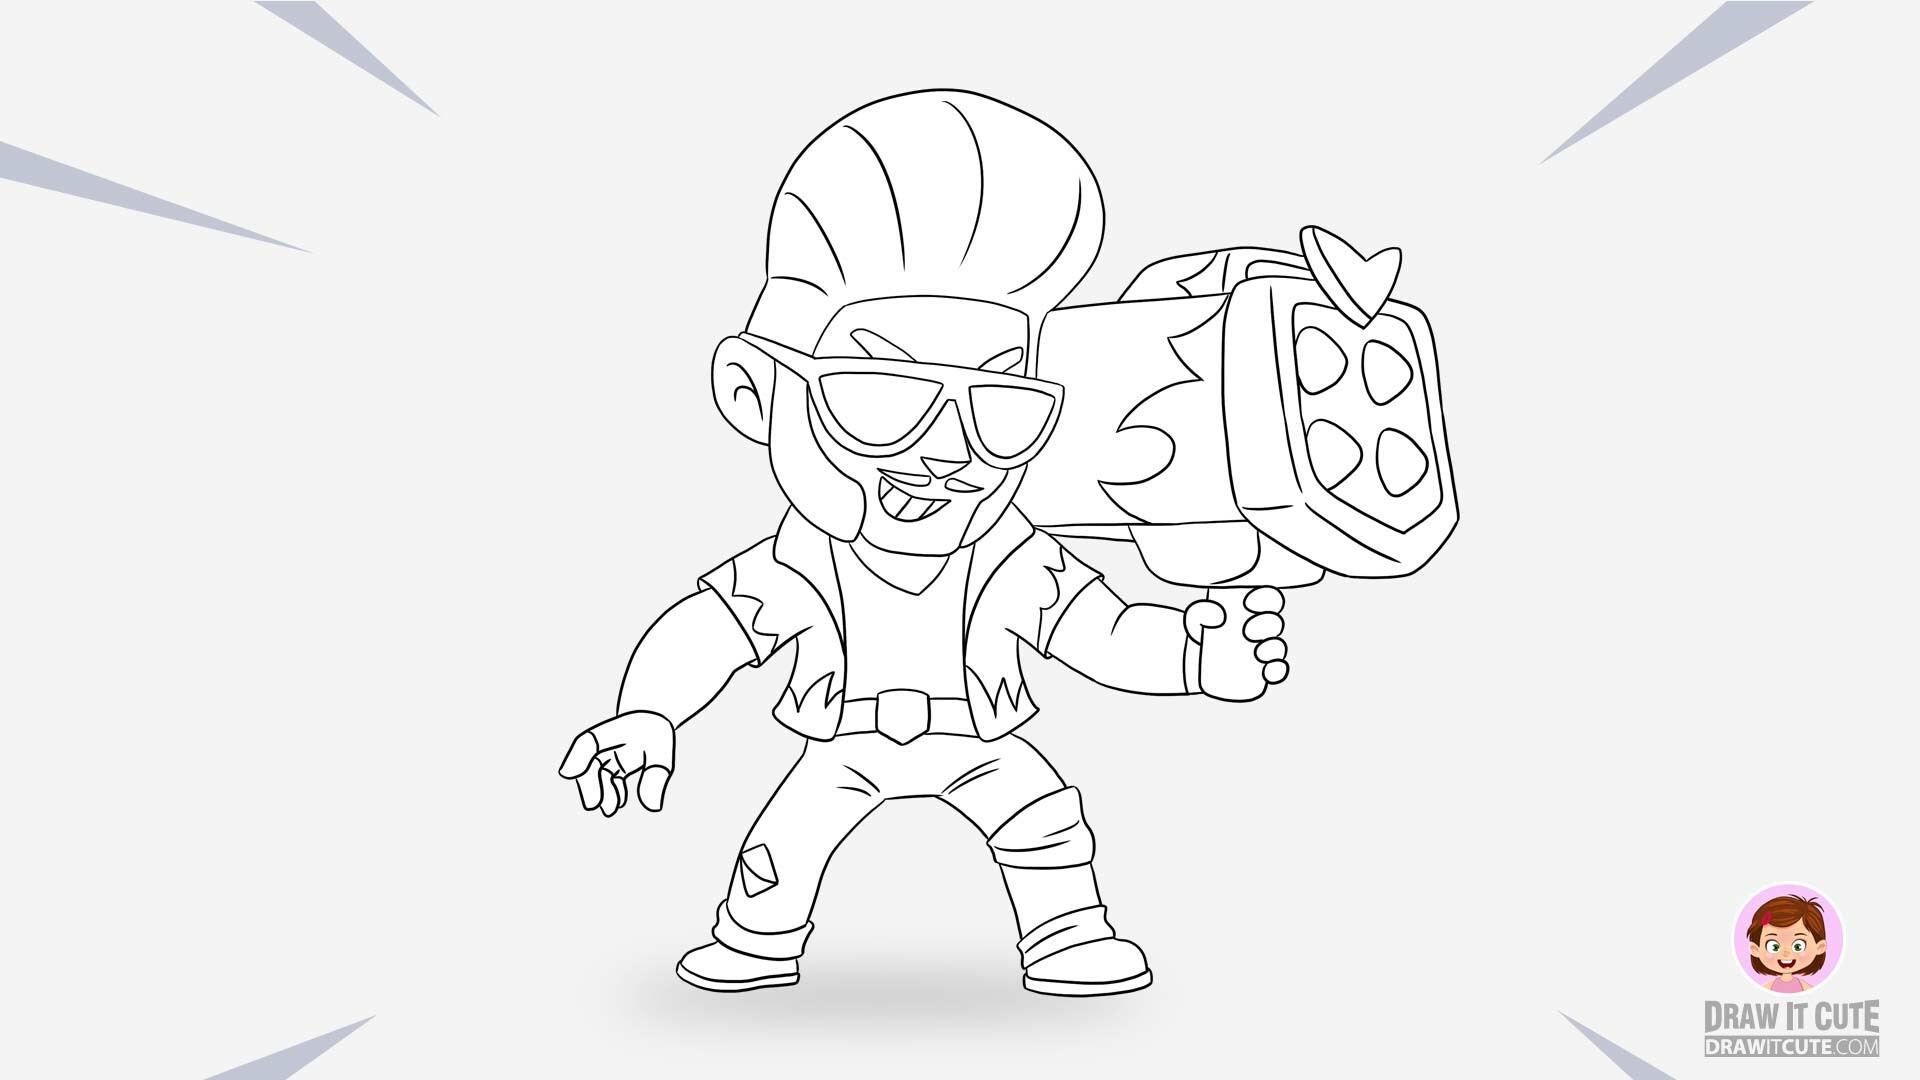 DrawitCute .Com - Home » Coloring pages » Brawl Stars ...